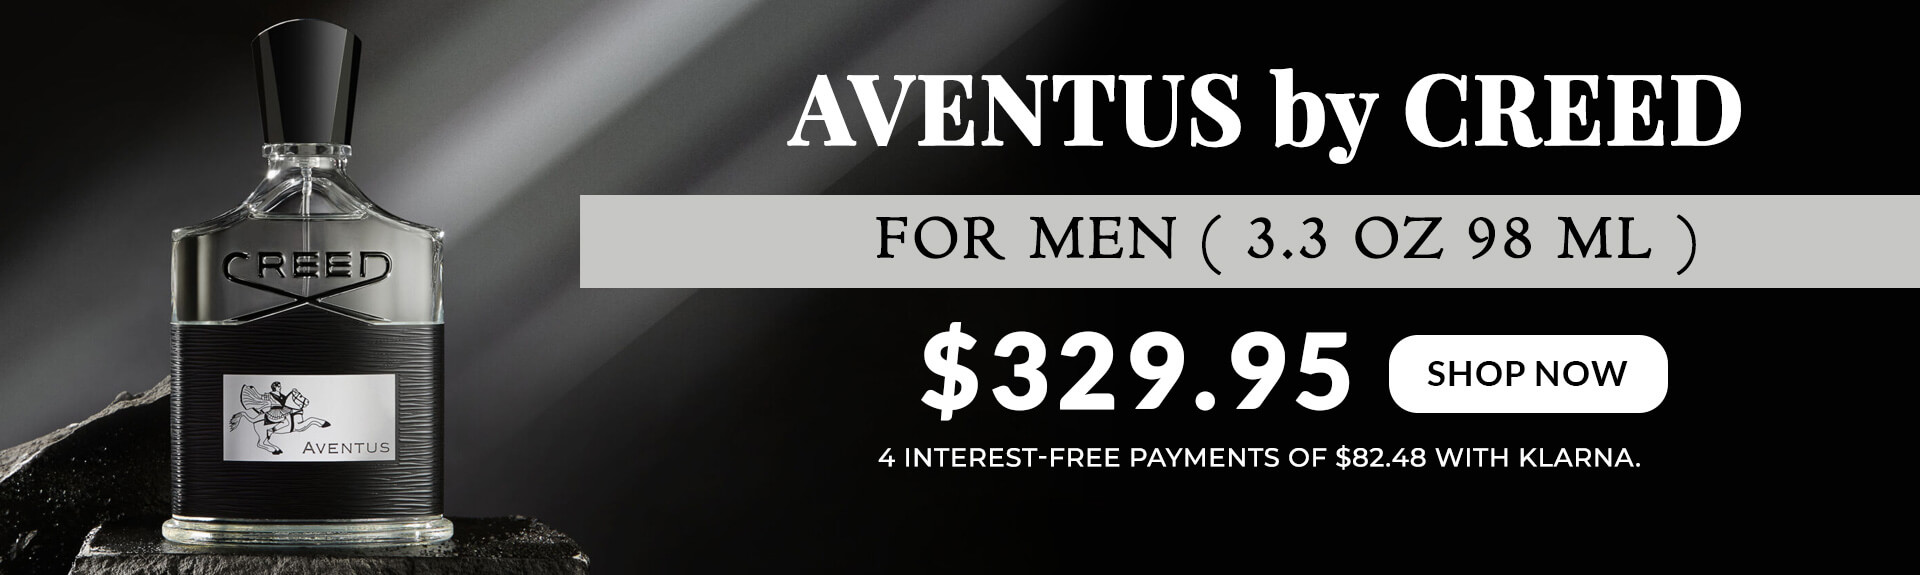 Aventus by Creed for Men